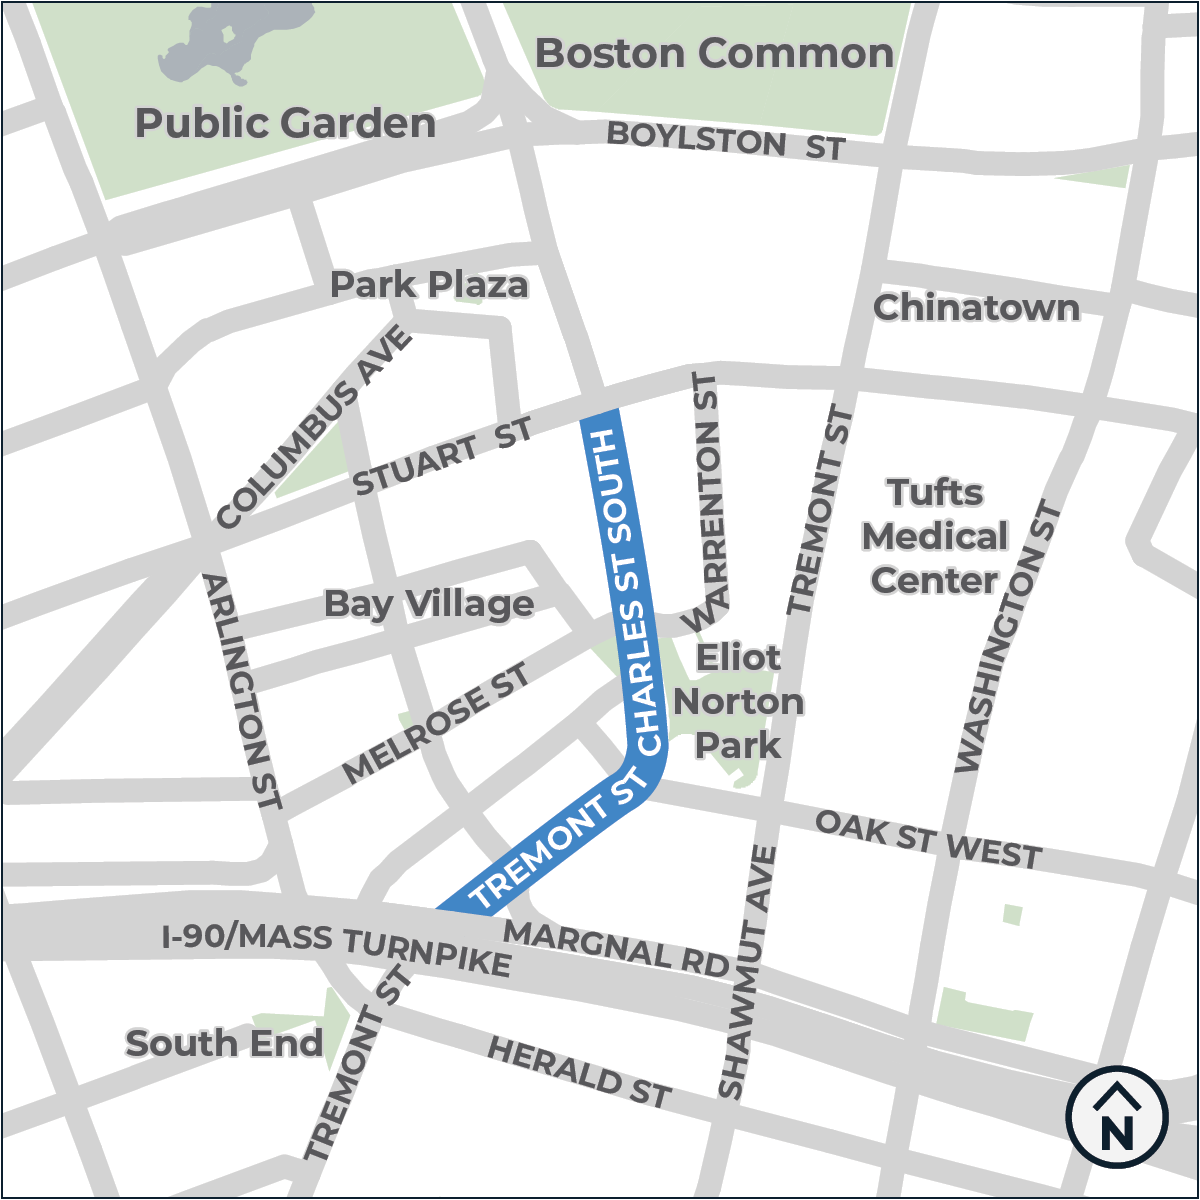 The project area includes: Charles Street South from Stuart Street to Tremont Street and Tremont Street from Charles Street South to Marginal Road.